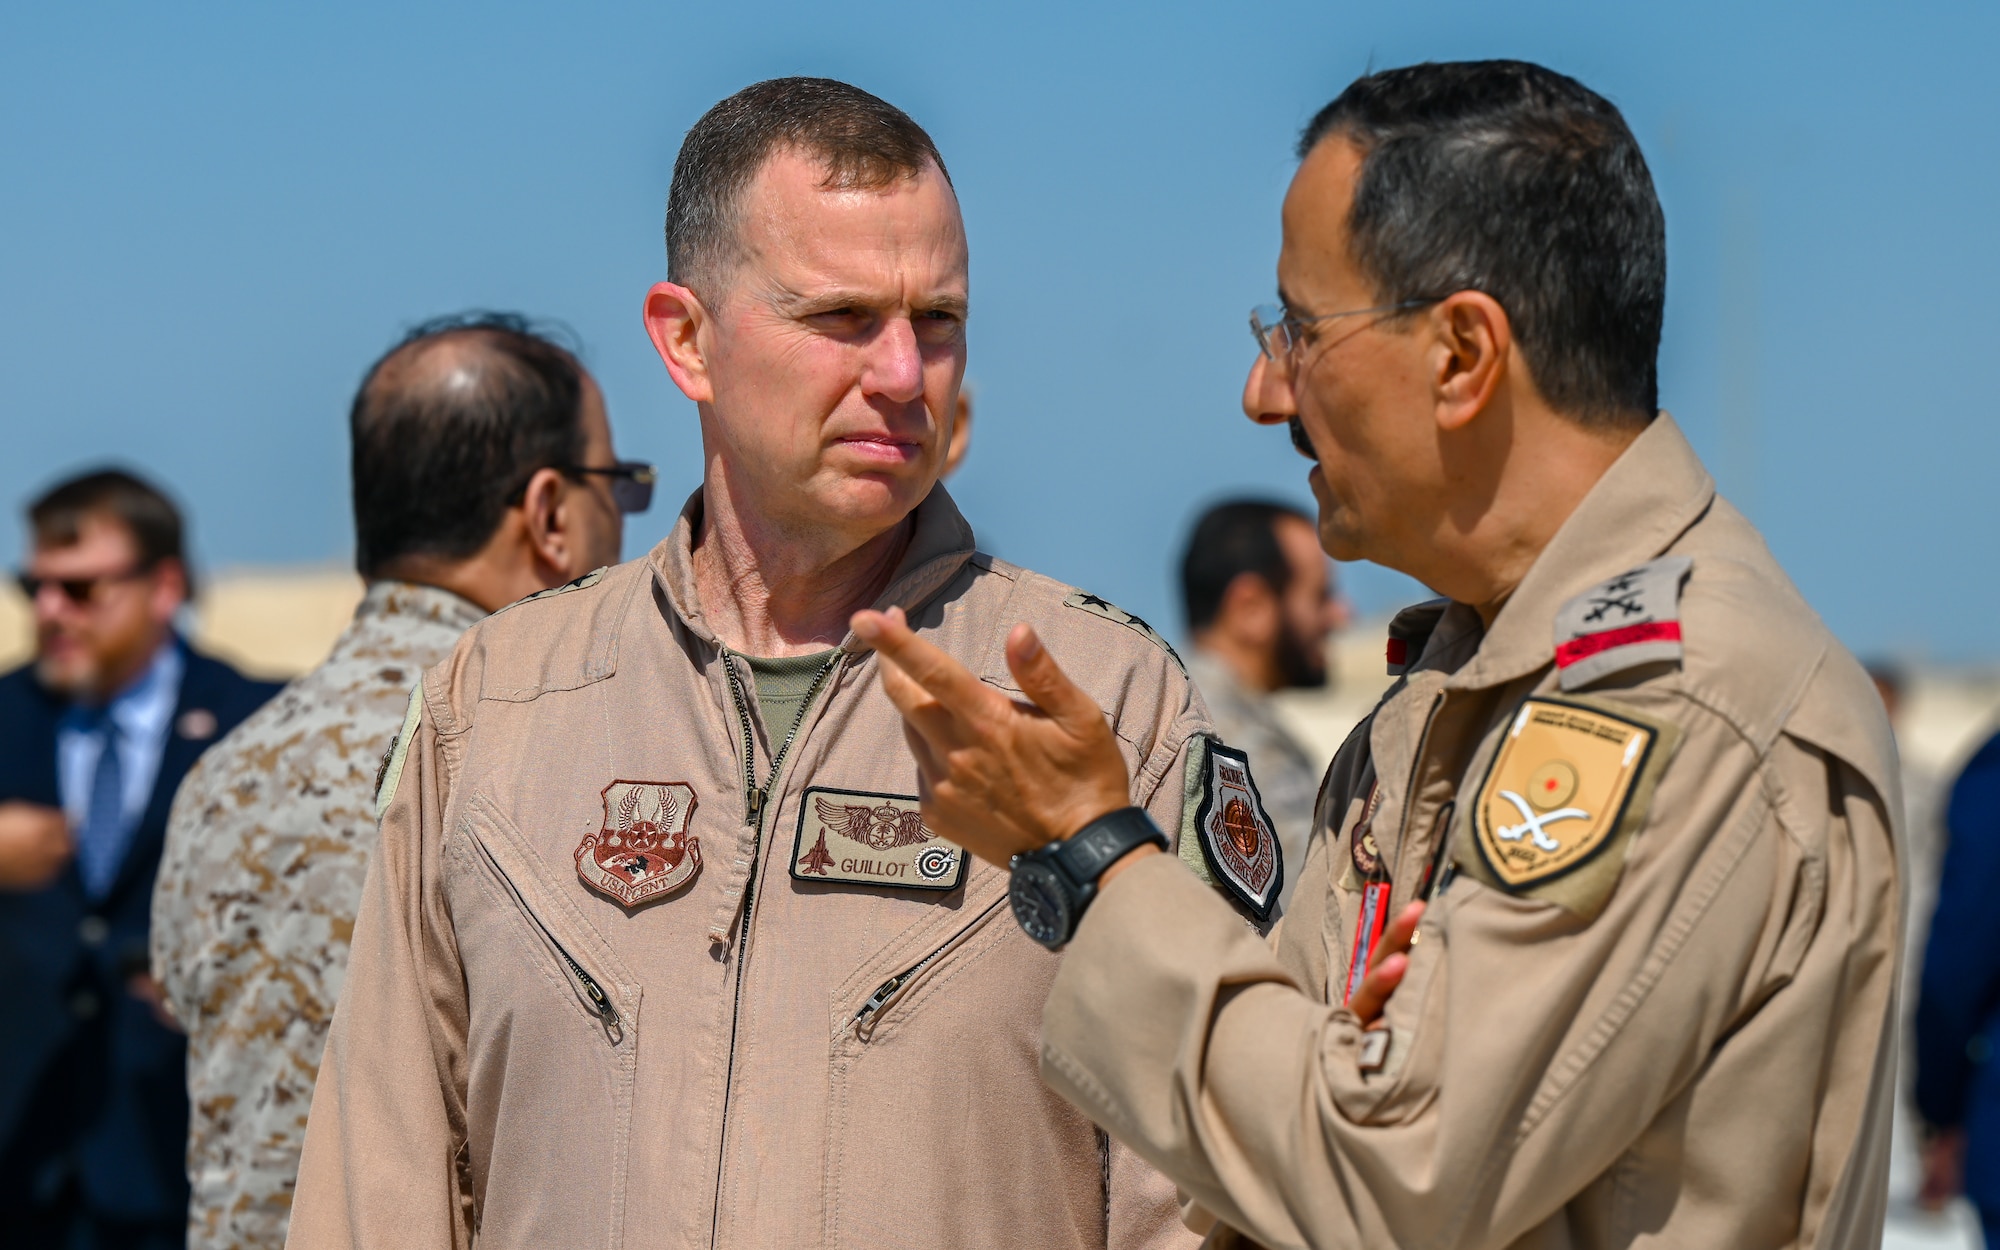 Lt. Gen. Gregory M. Guillot, Ninth Air Force (Air Forces Central) commander, speaks with Lt. Gen. Turki bin Bandar bin Abdulaziz, Royal Saudi Air Force commander, during the multinational RSAF led exercise, Spears of Victory at King Abdulaziz Air Base, Kingdom of Saudi Arabia, Feb. 17, 2022. Training with partner nations strengthens military-to-military relationships, improves interoperability and promotes regional stability. (U.S. Air Force photo by Staff Sgt. Christina A. Graves)